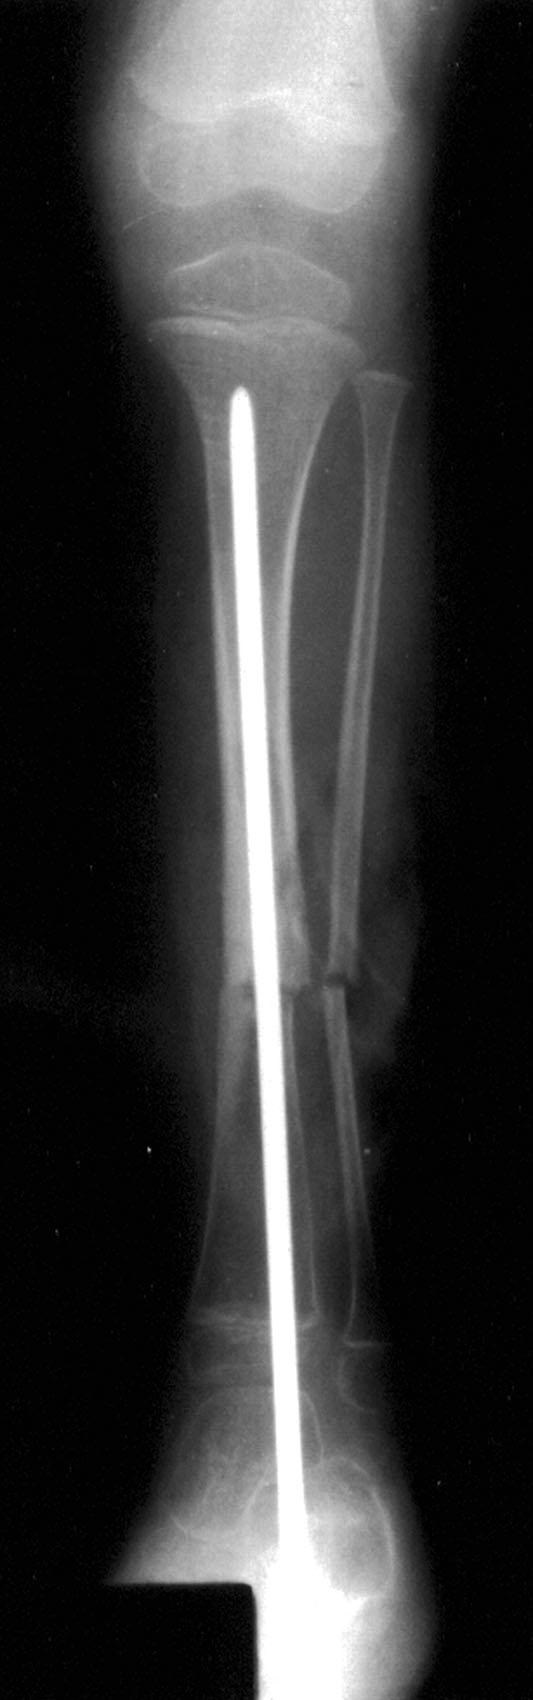 throsis preoperatively (six of ten patients), even when the fibular lesion had been excised and had subsequently united.